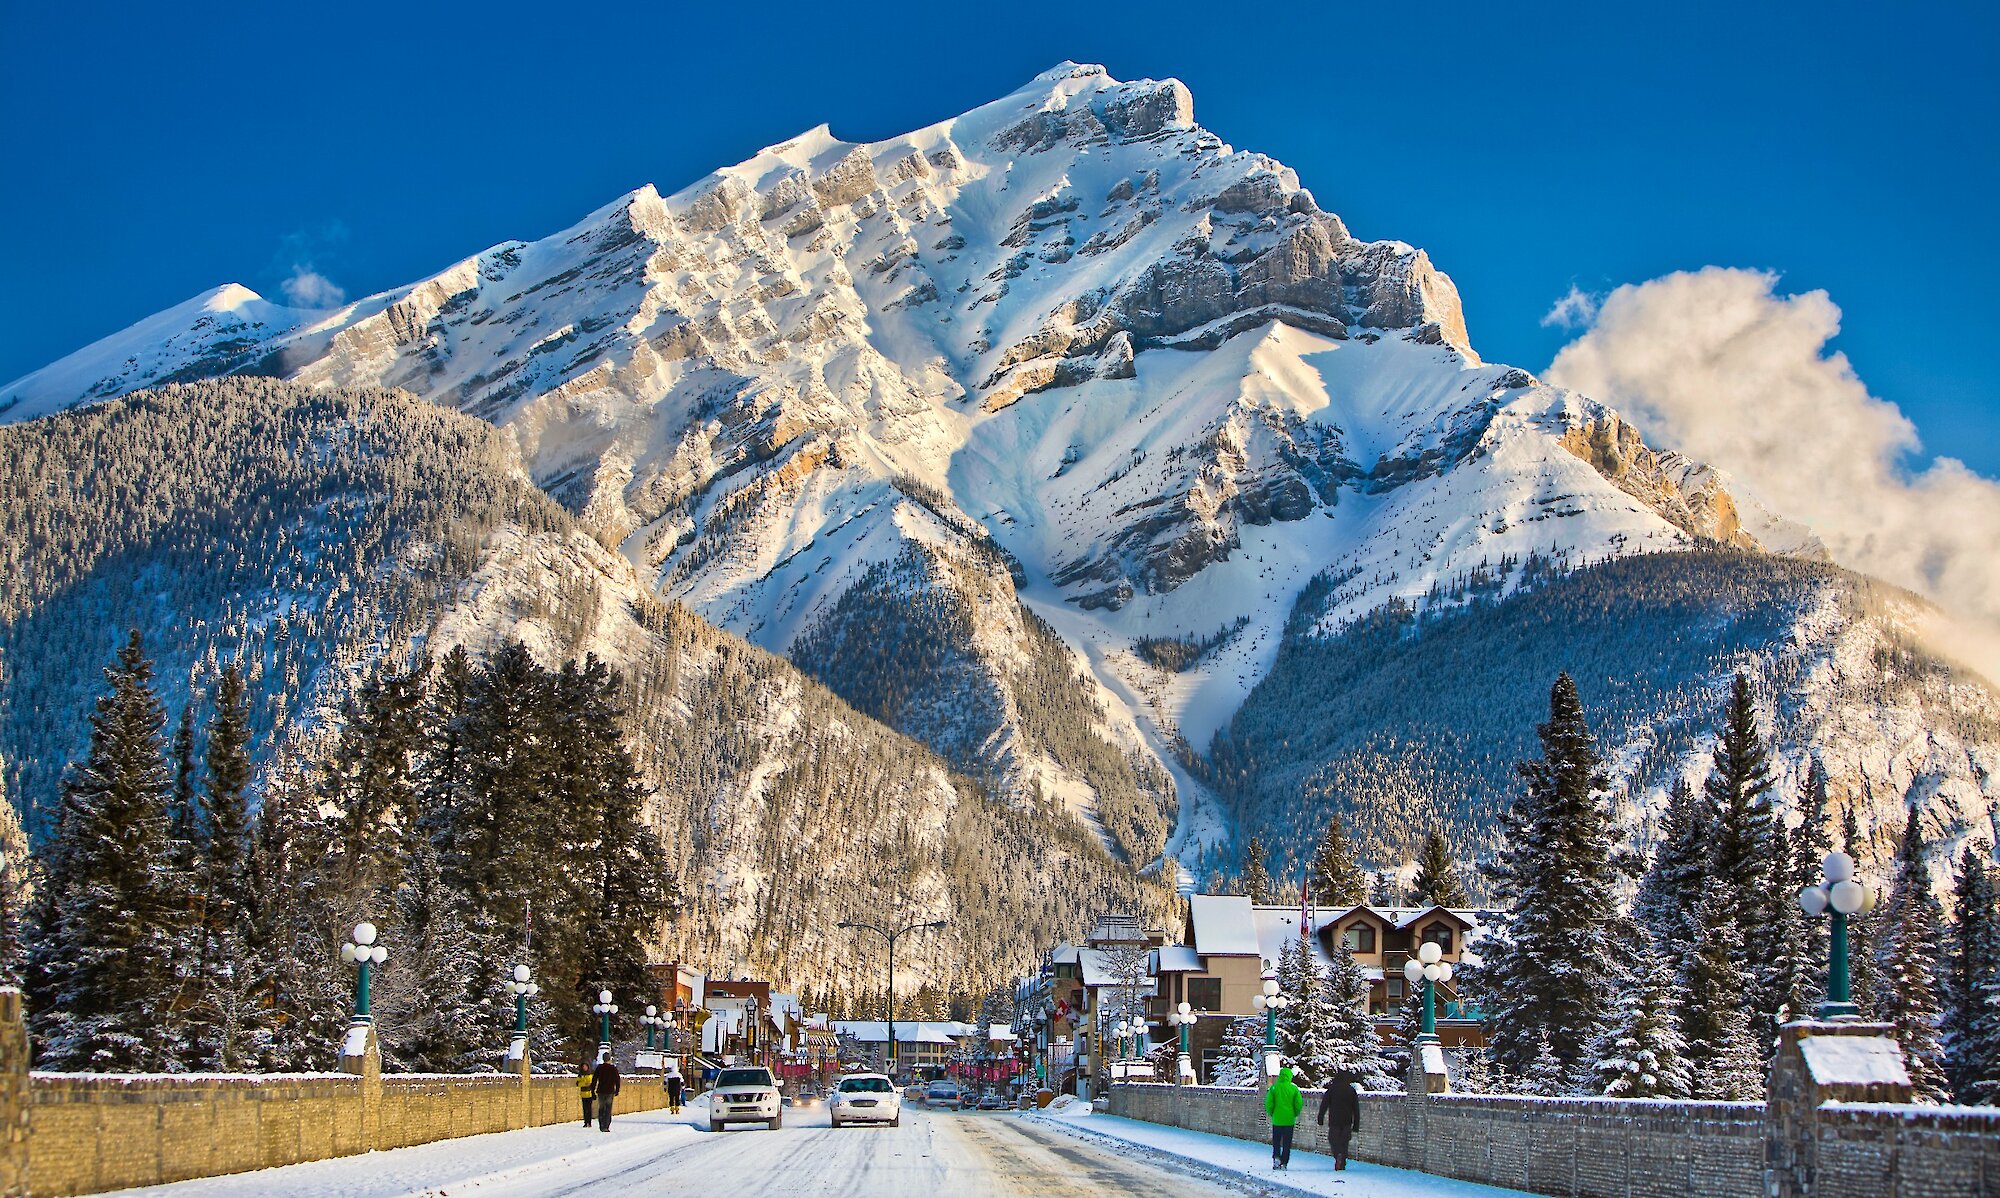 Stunnnig view of Banff Ave and Cascade Mountain in winter